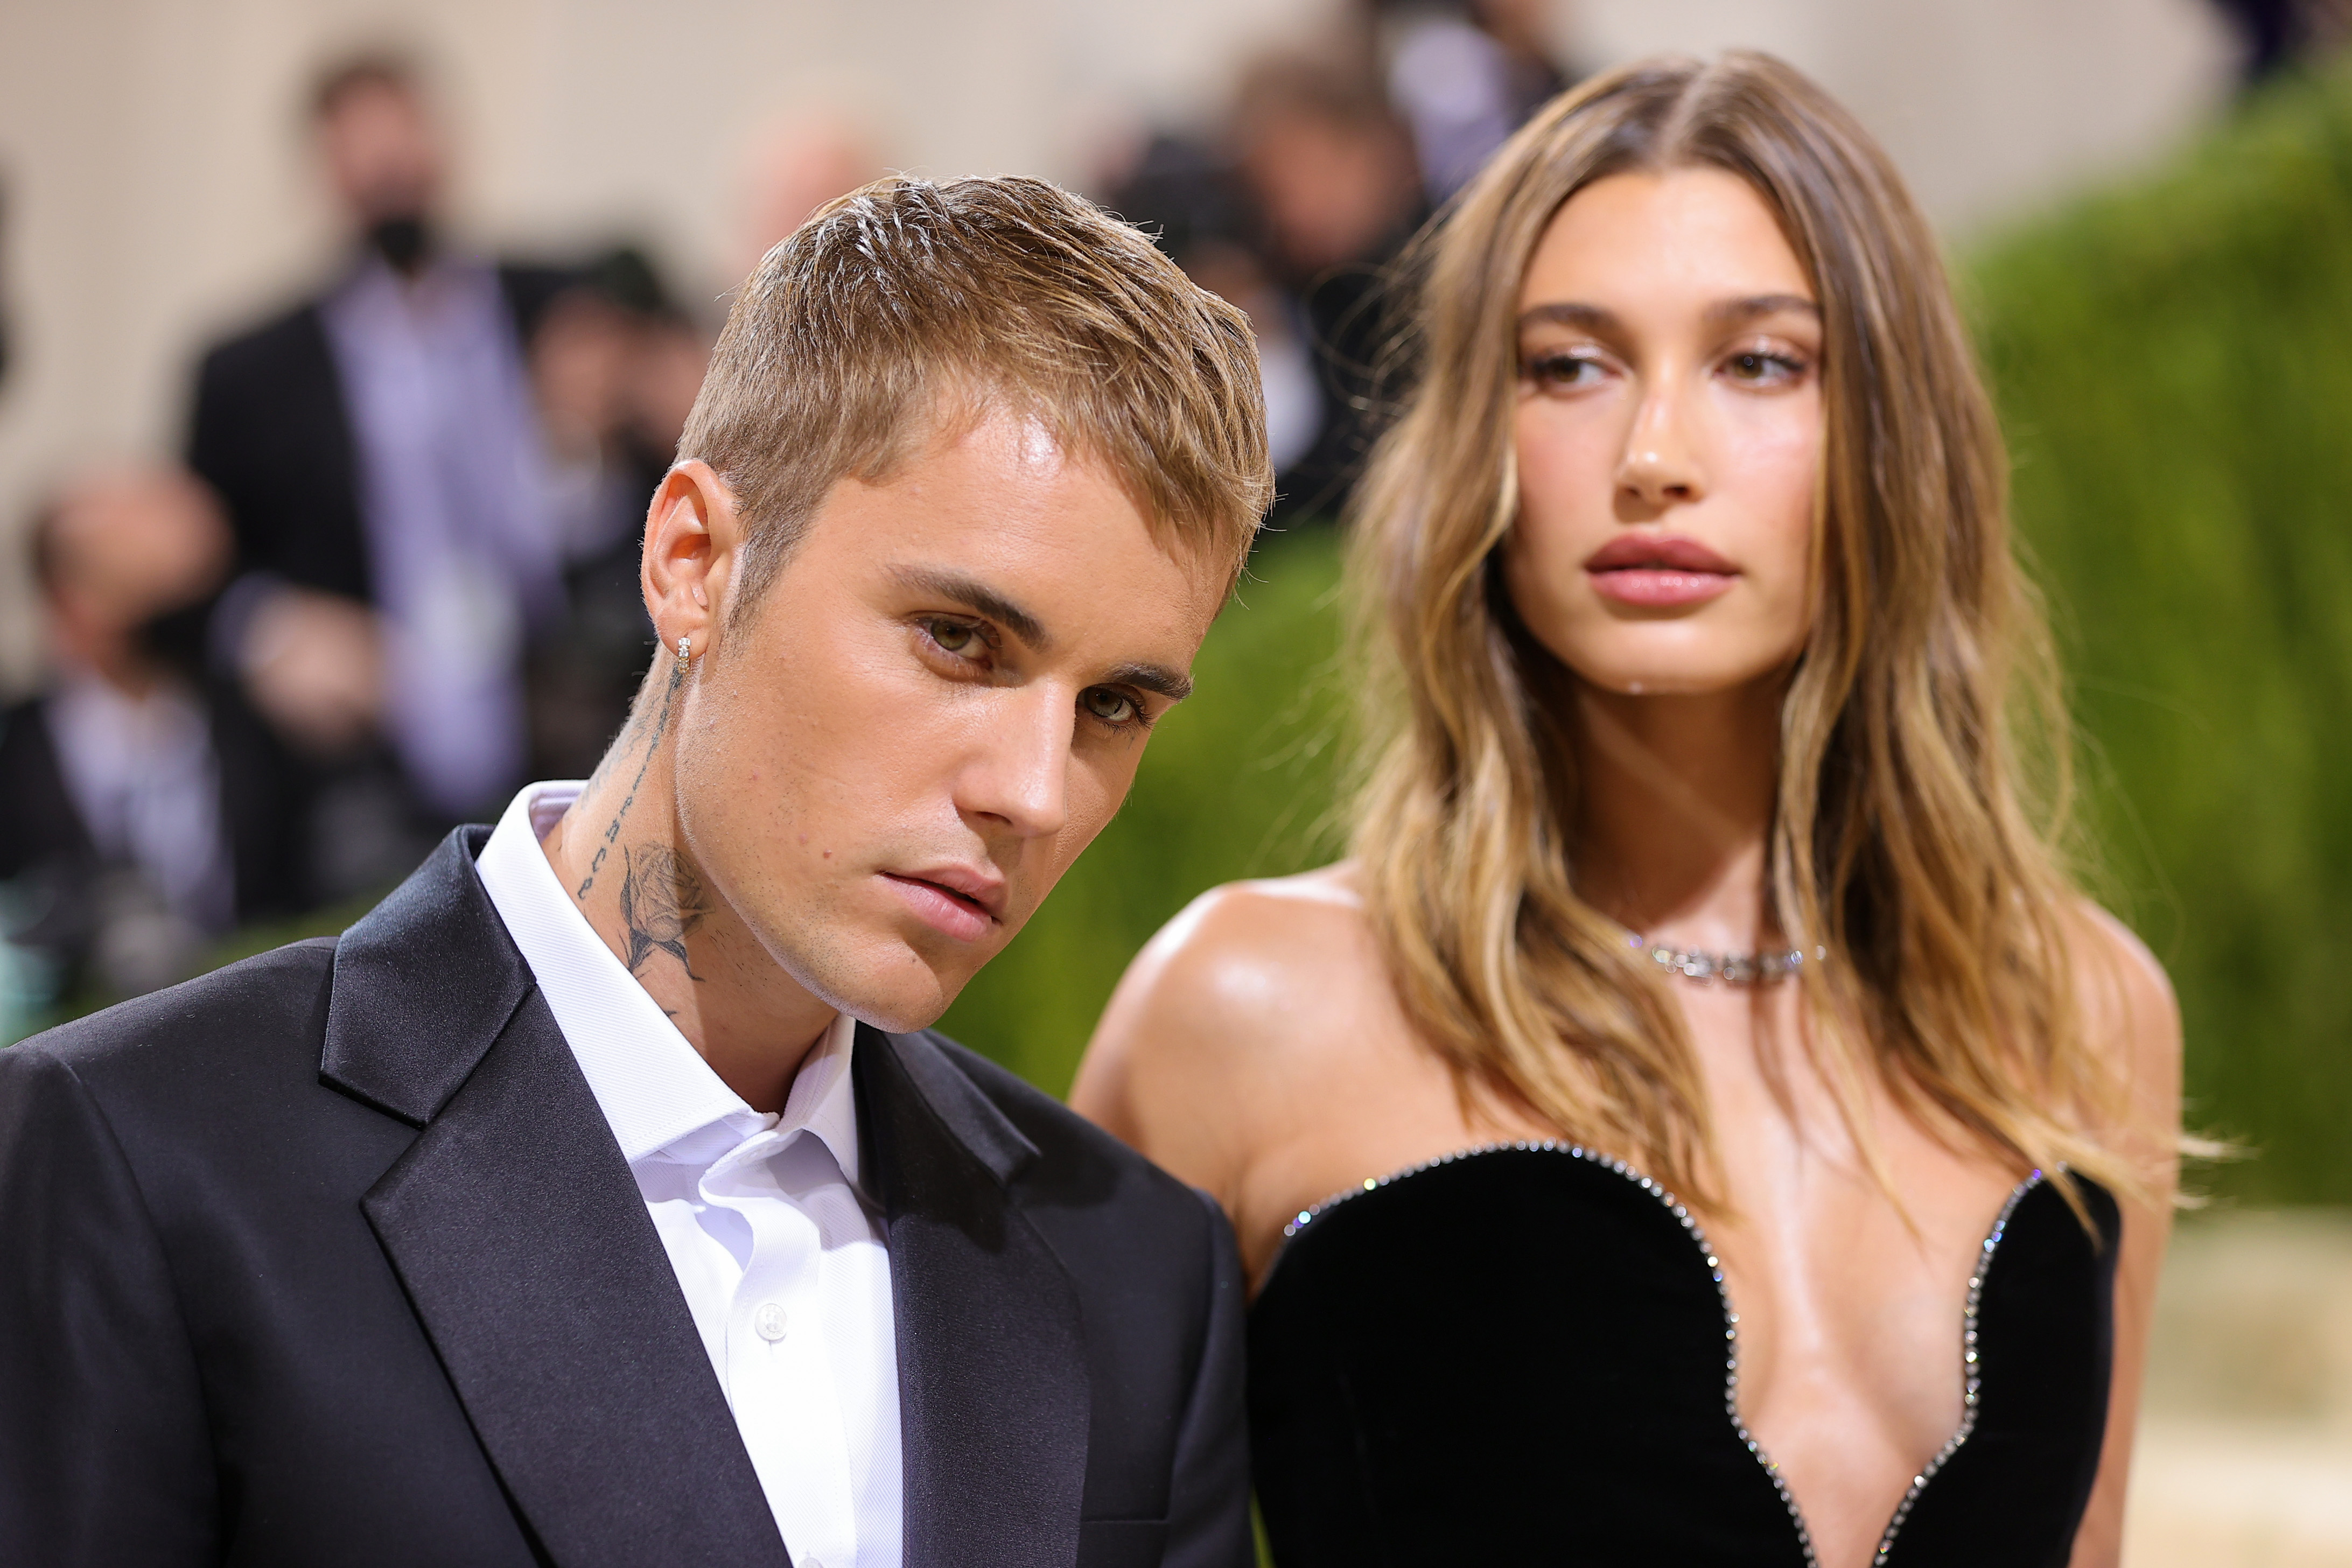 Justin Bieber and Hailey Bieber attend The Met Gala Celebrating In America: A Lexicon Of Fashion at Metropolitan Museum of Art in New York City, on September 13, 2021. | Source: Getty Images